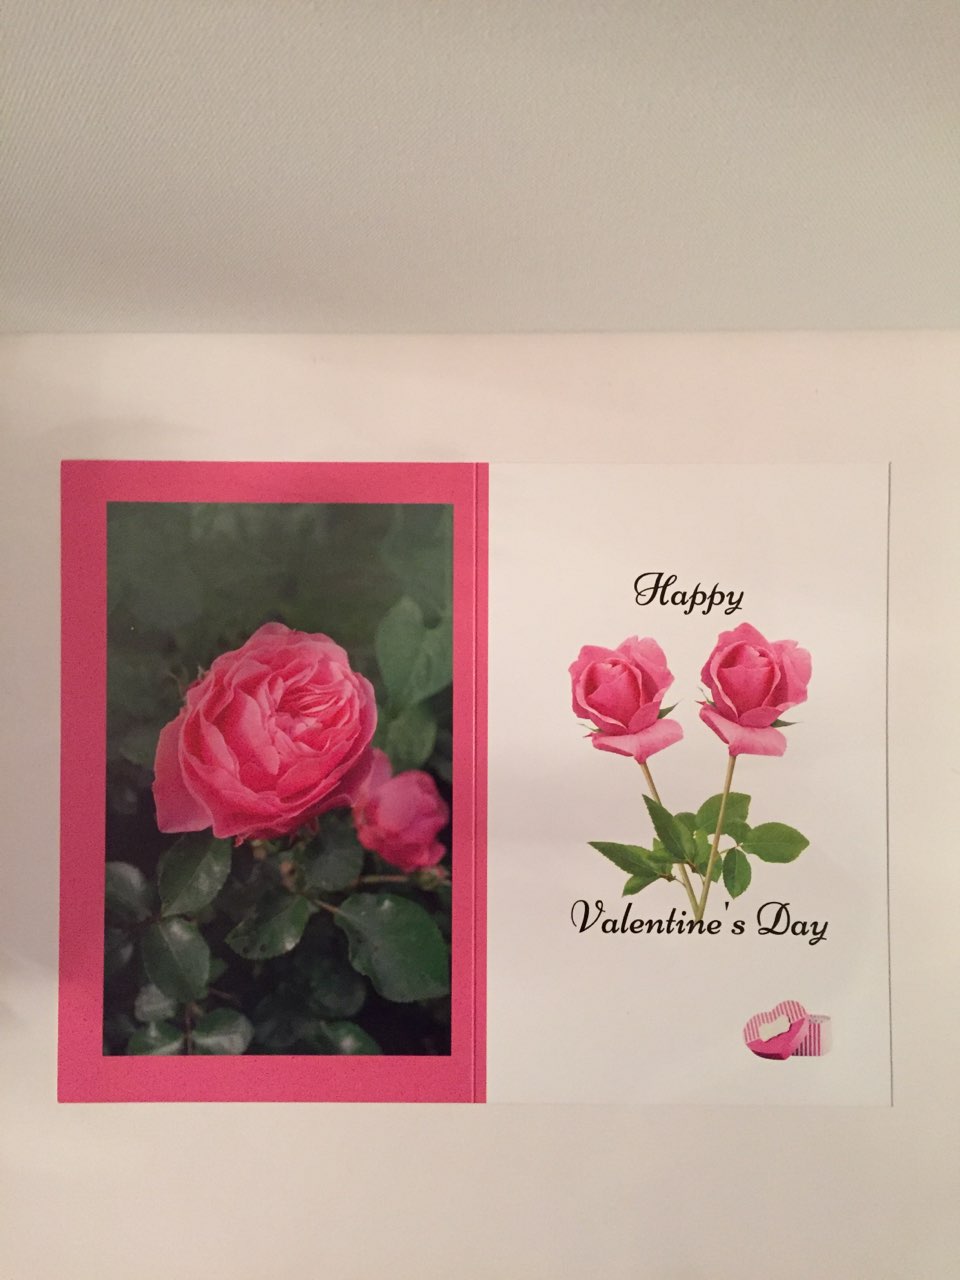 Our Love Grows Stronger 5.5 x 8.5 Valentine's Day Card